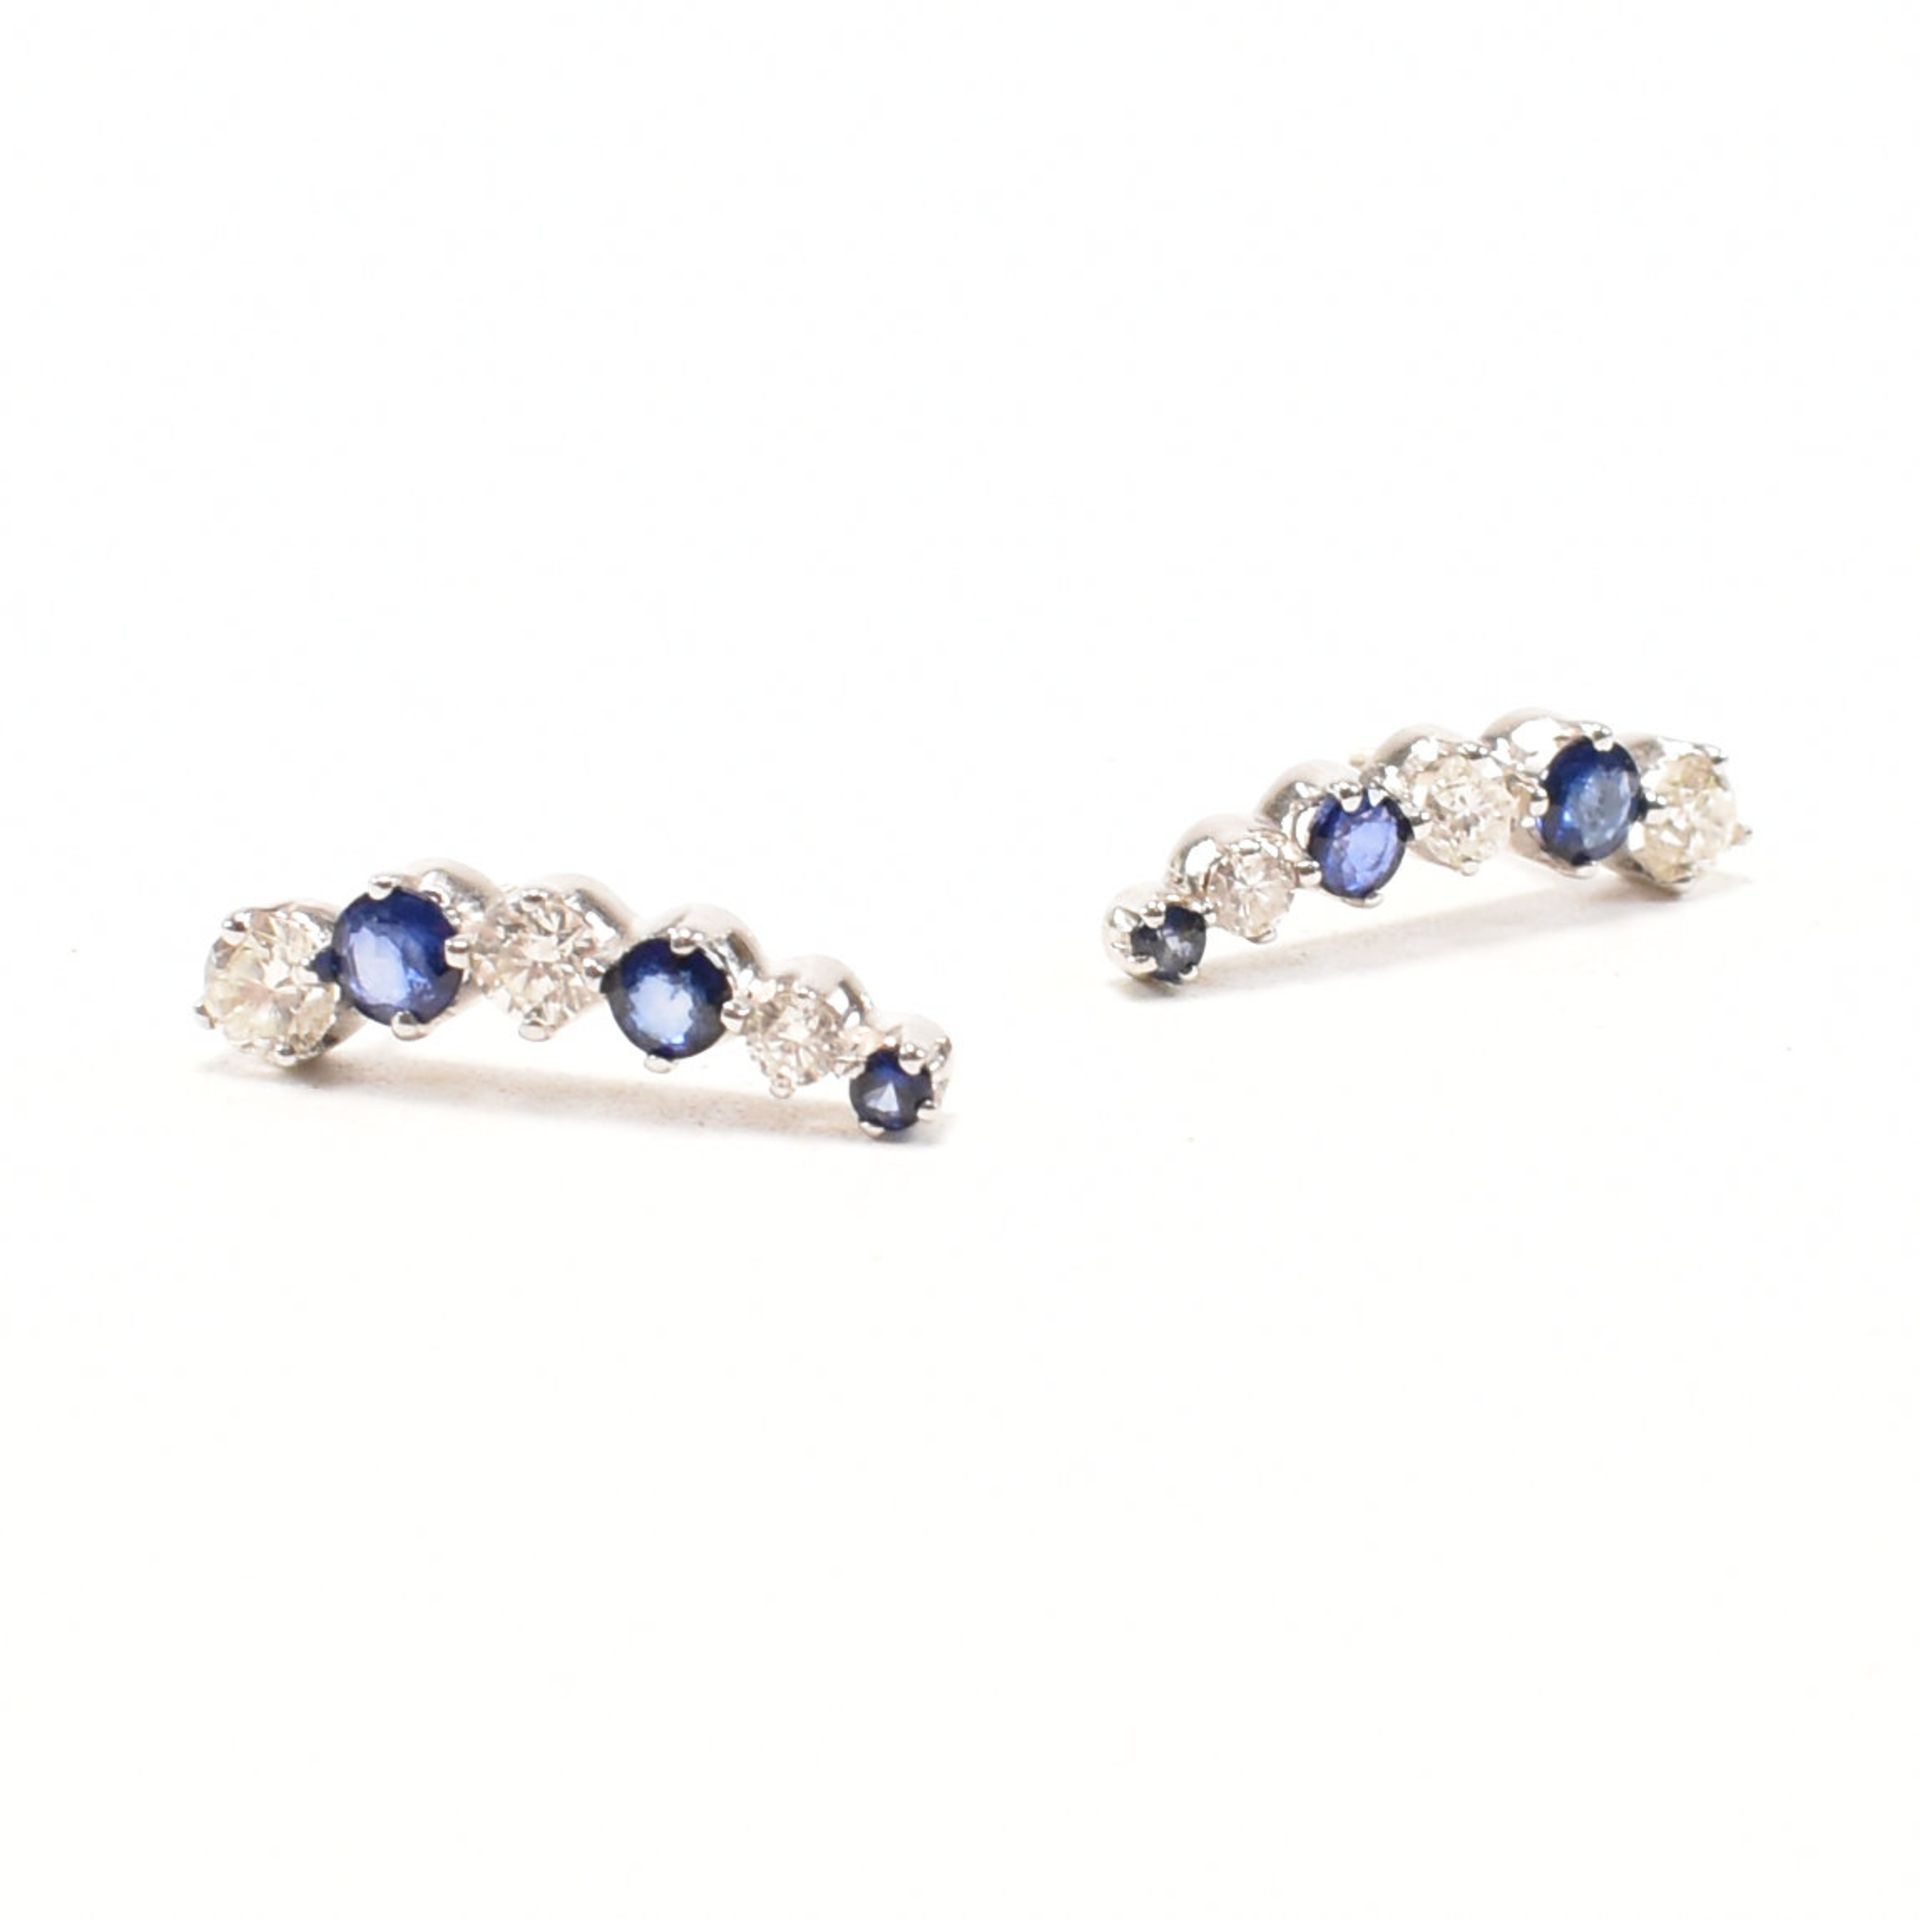 PAIR OF 14CT WHITE GOLD SAPPHIRE & DIAMOND EARRINGS - Image 4 of 8